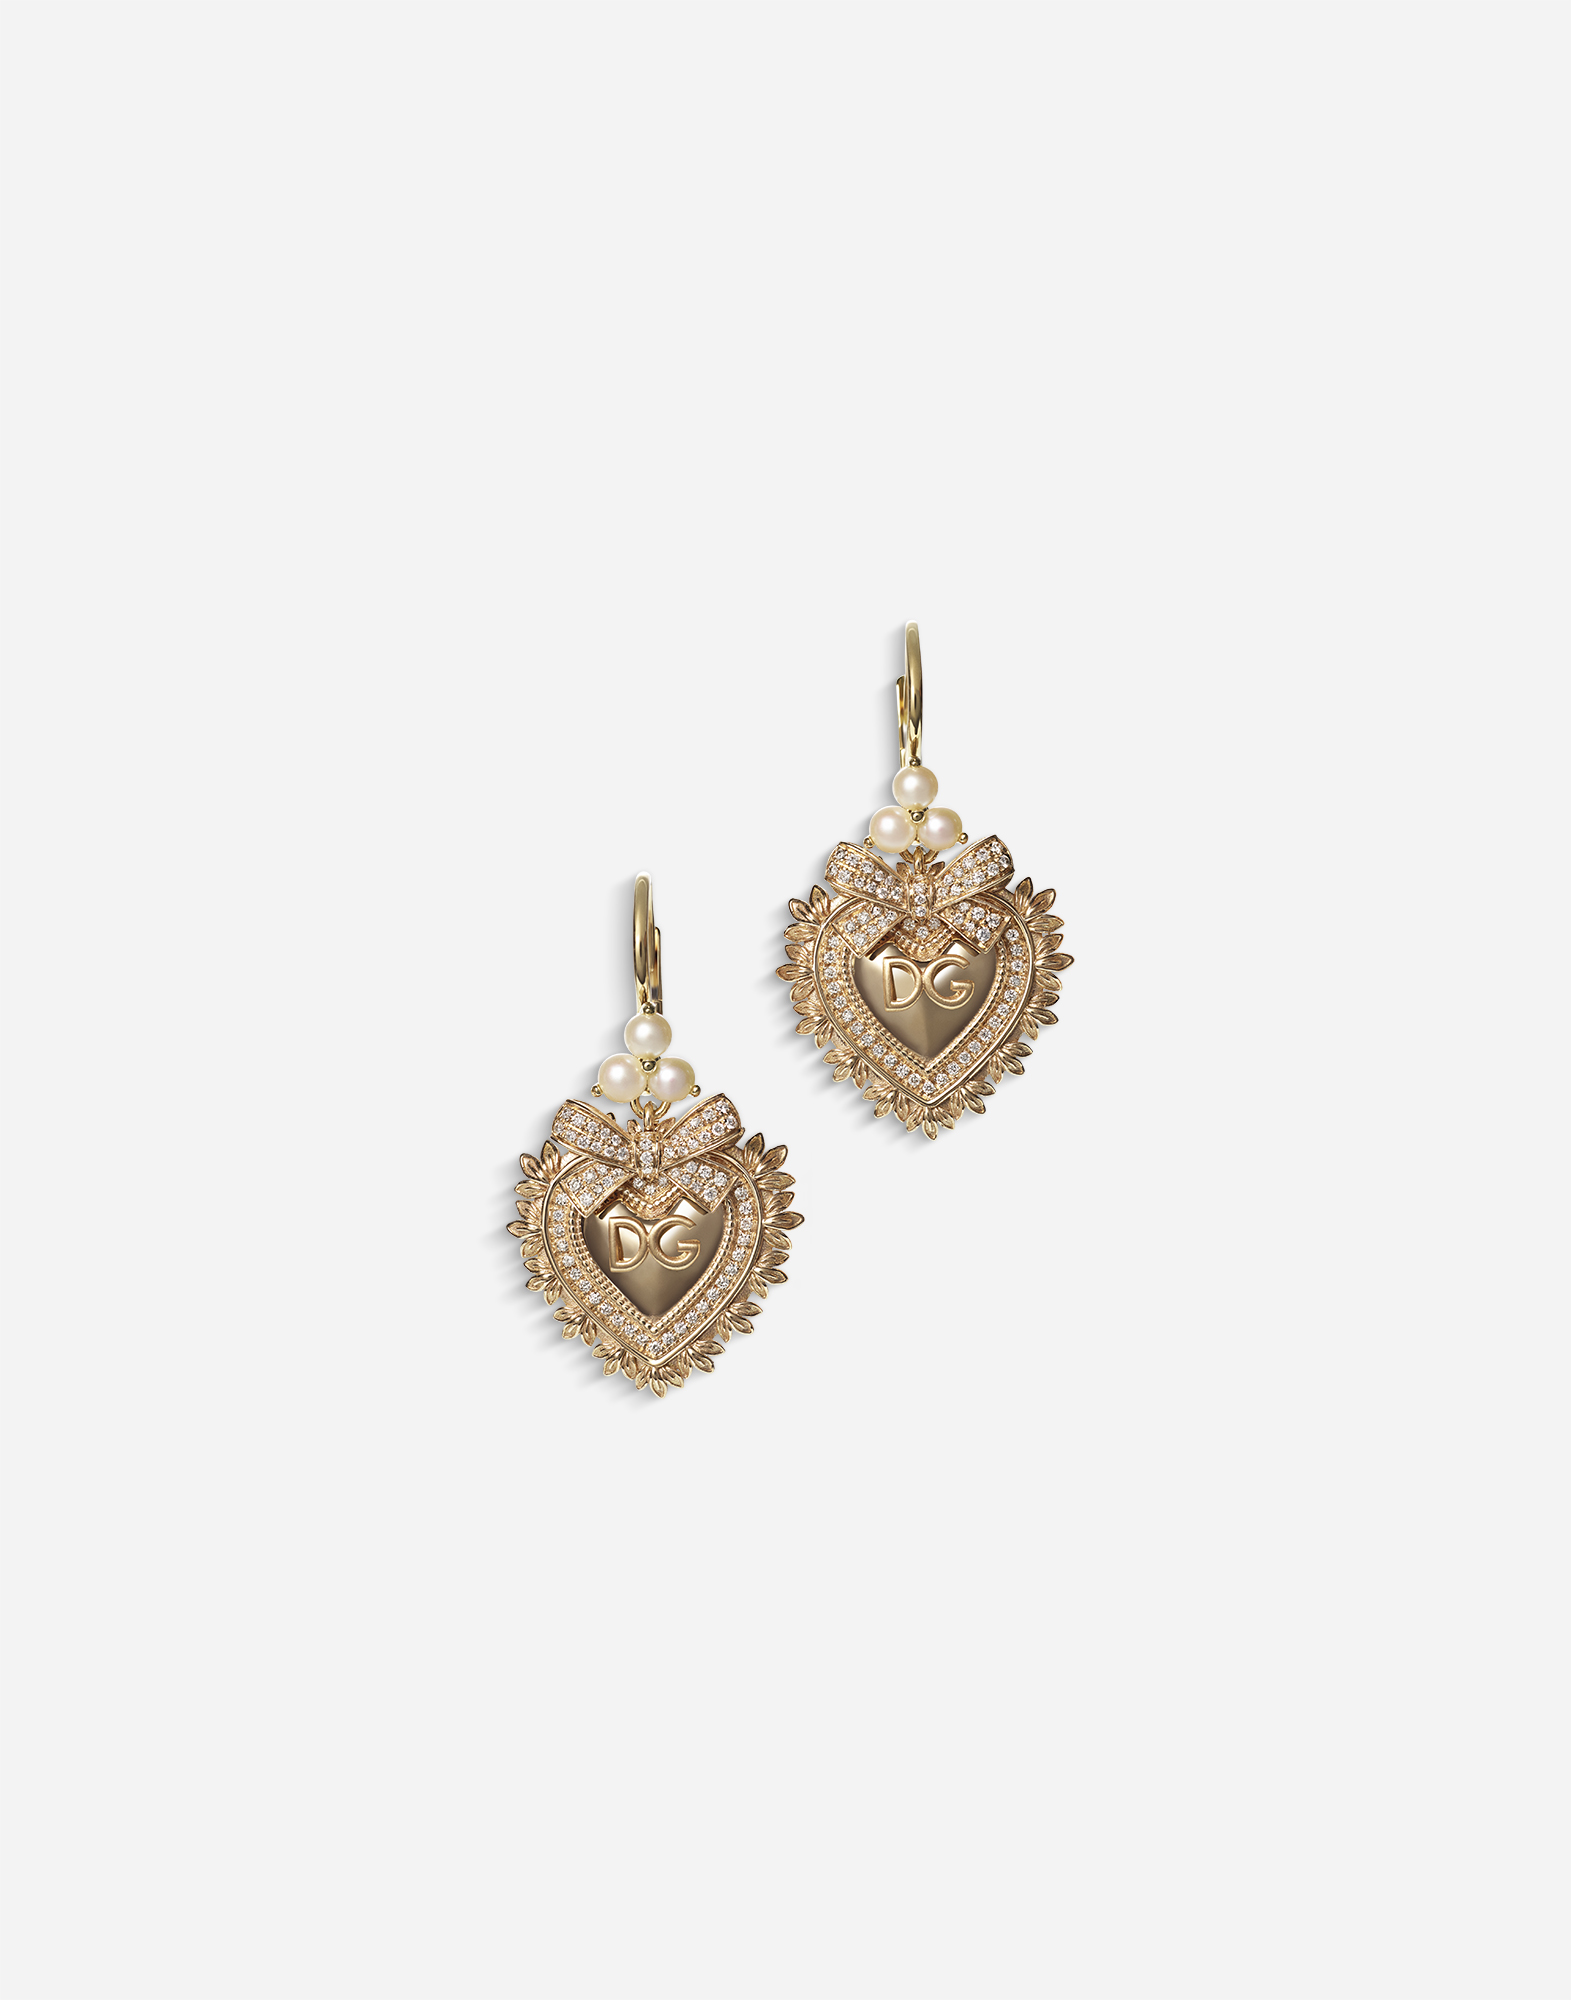 Devotion earrings in yellow gold with diamonds and pearls in Yellow Gold